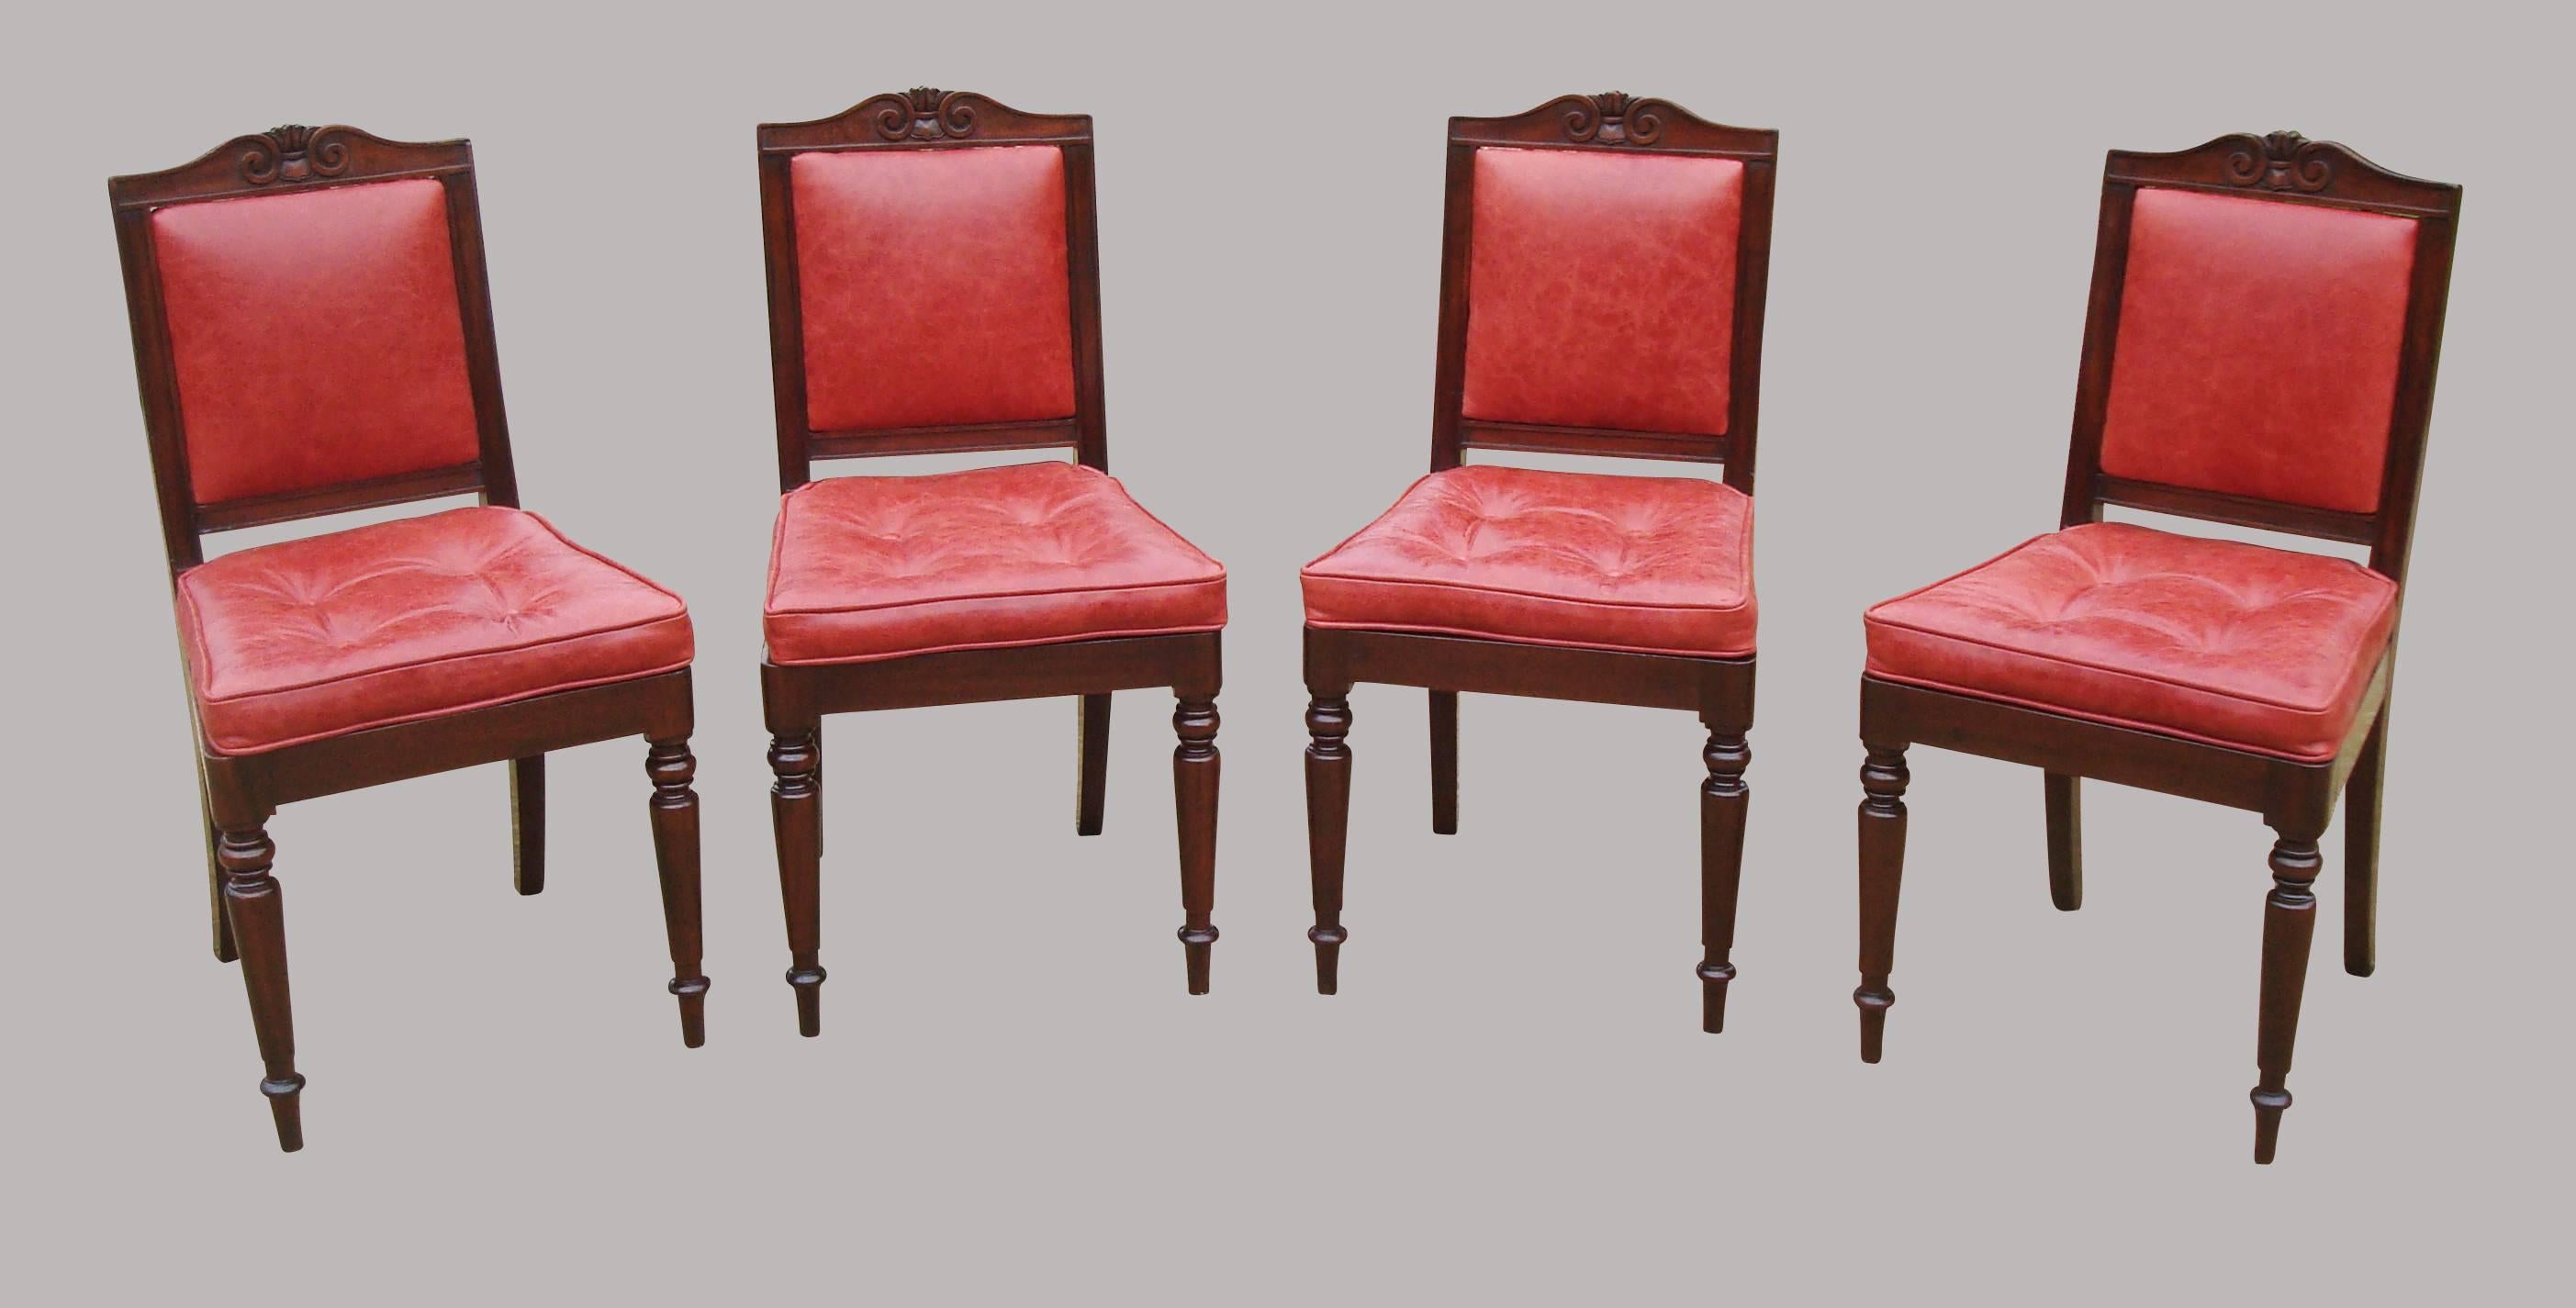 Good Gillows late Regency set of four mahogany side chairs, stamped 'Gillows Lancaster' and newly upholstered in good quality red leather; the shaped top rail with a carved scroll cresting, above an upholstered back panel. The buttoned squab